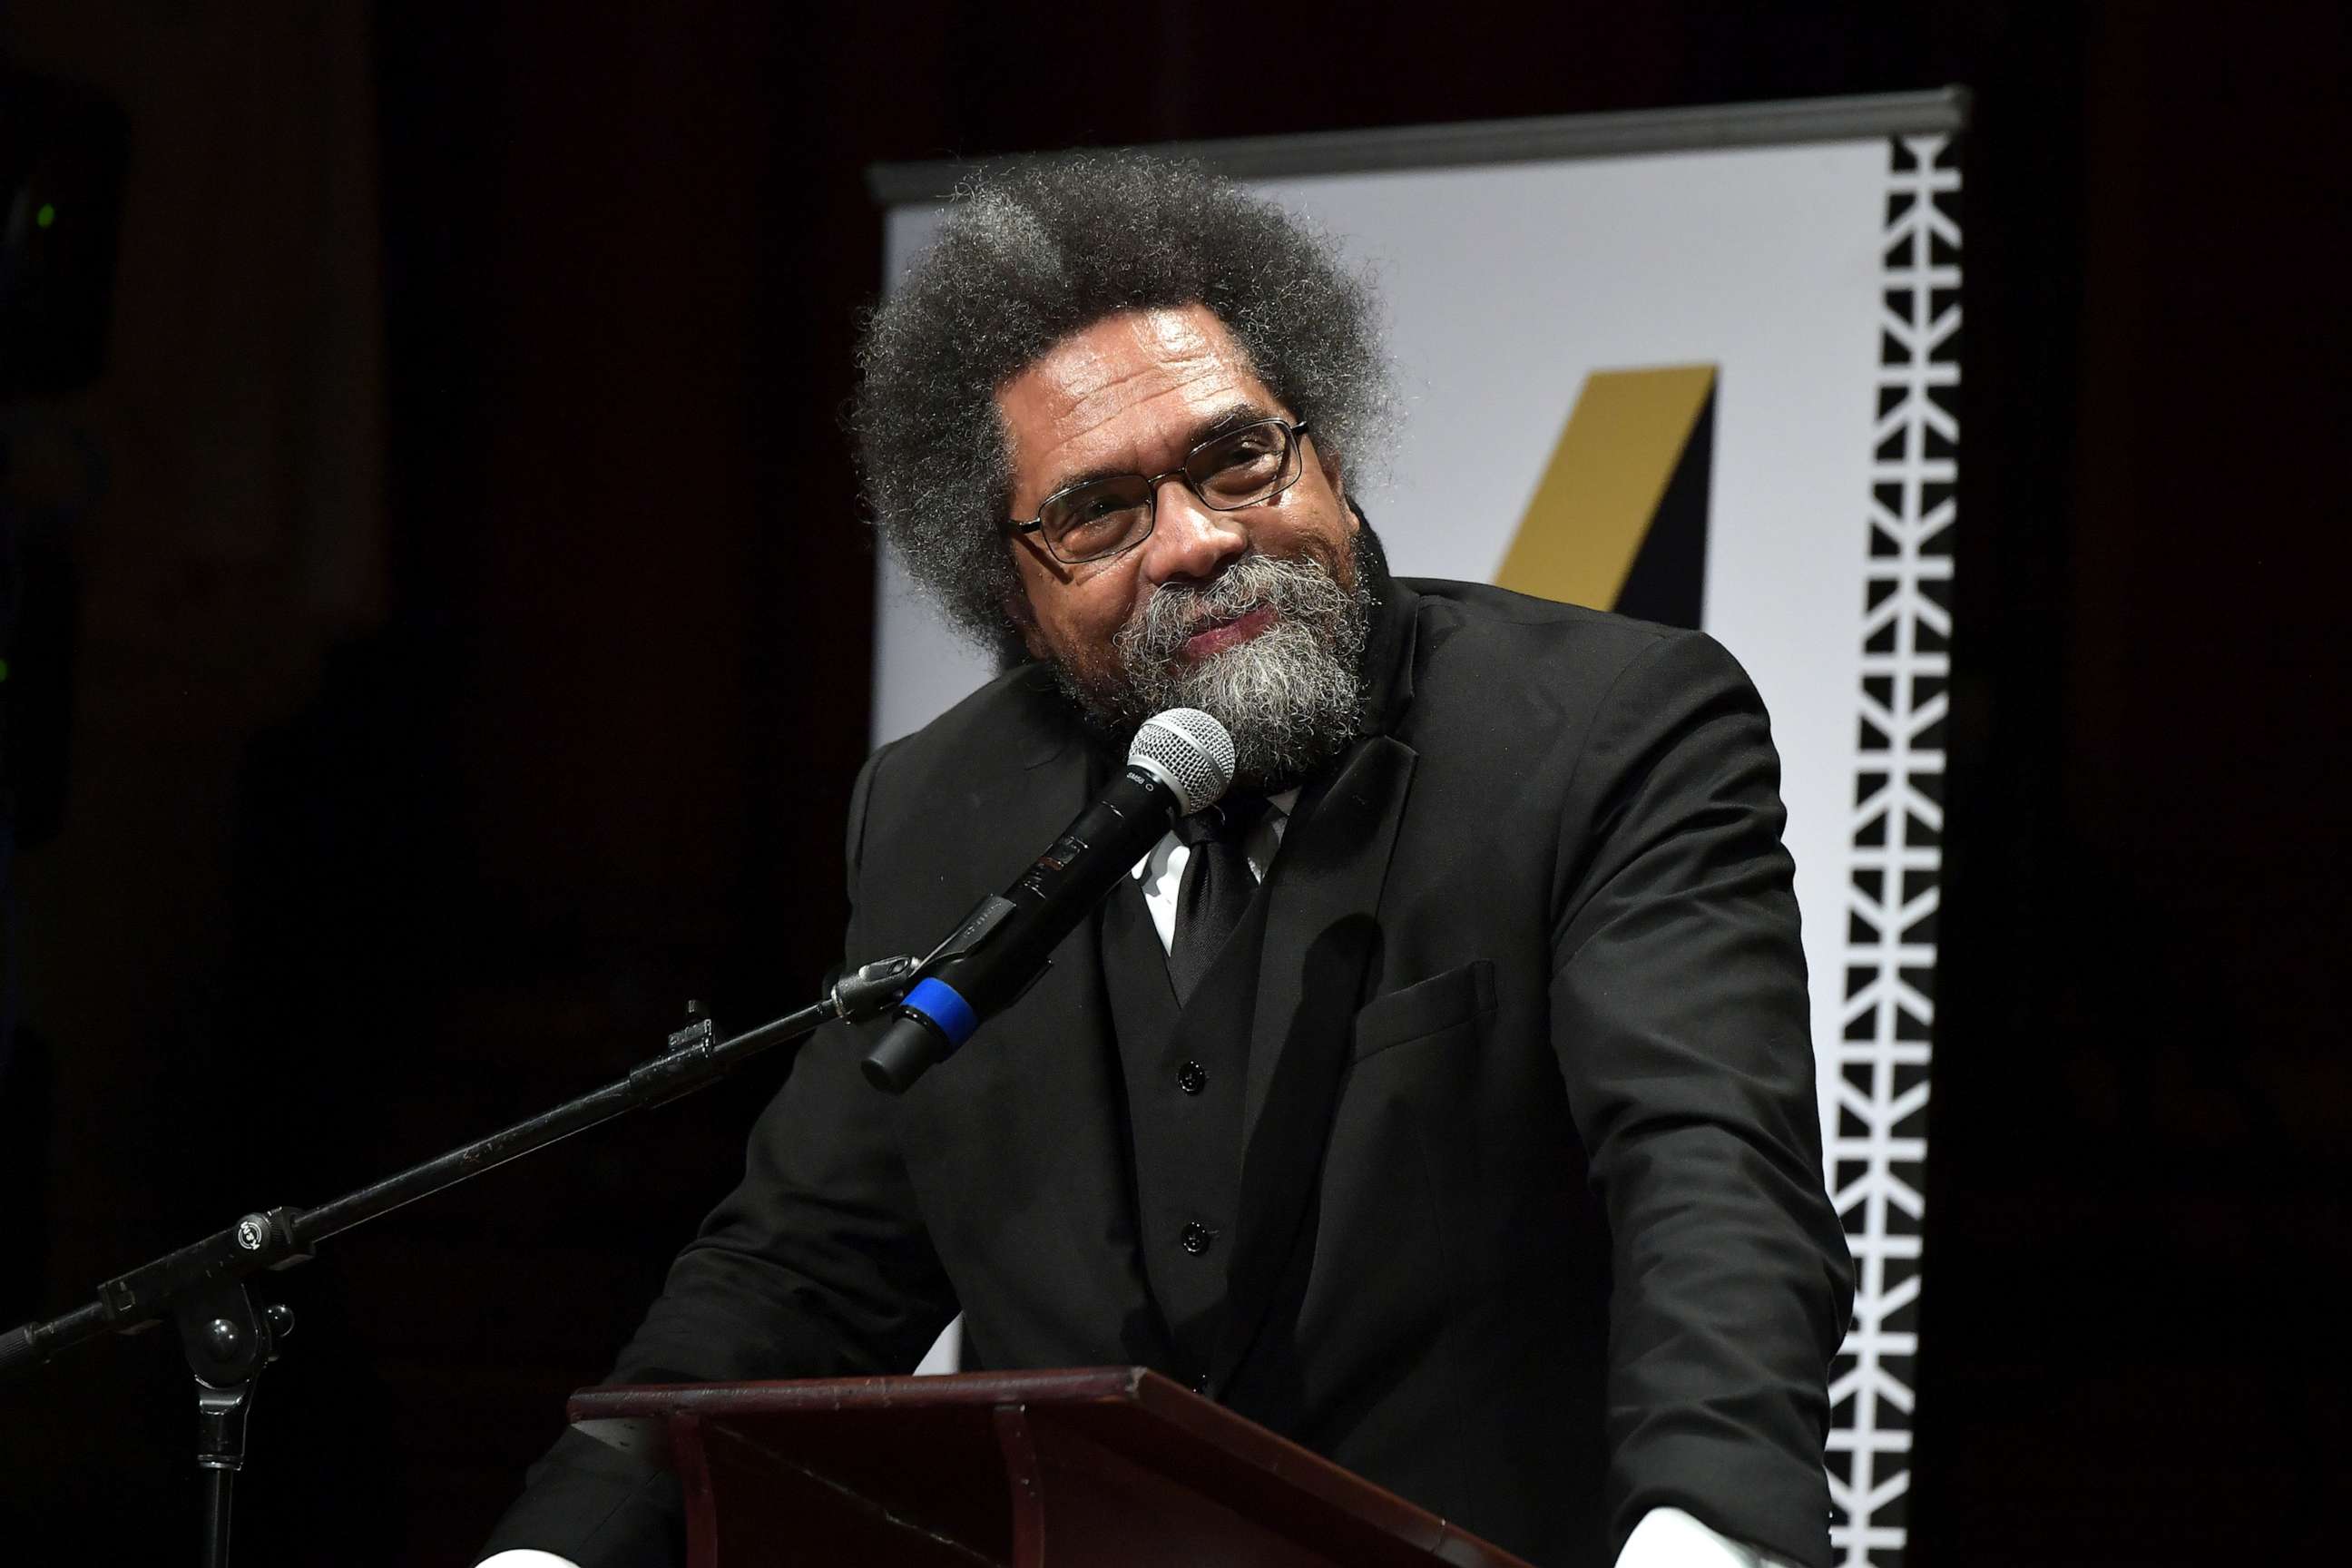 PHOTO: In this Oct. 22, 2019, file photo, Cornel West speaks at the 2019 Hutchins Center Honors W.E.B. Du Bois Medal Ceremony at Harvard University in Cambridge, Mass.